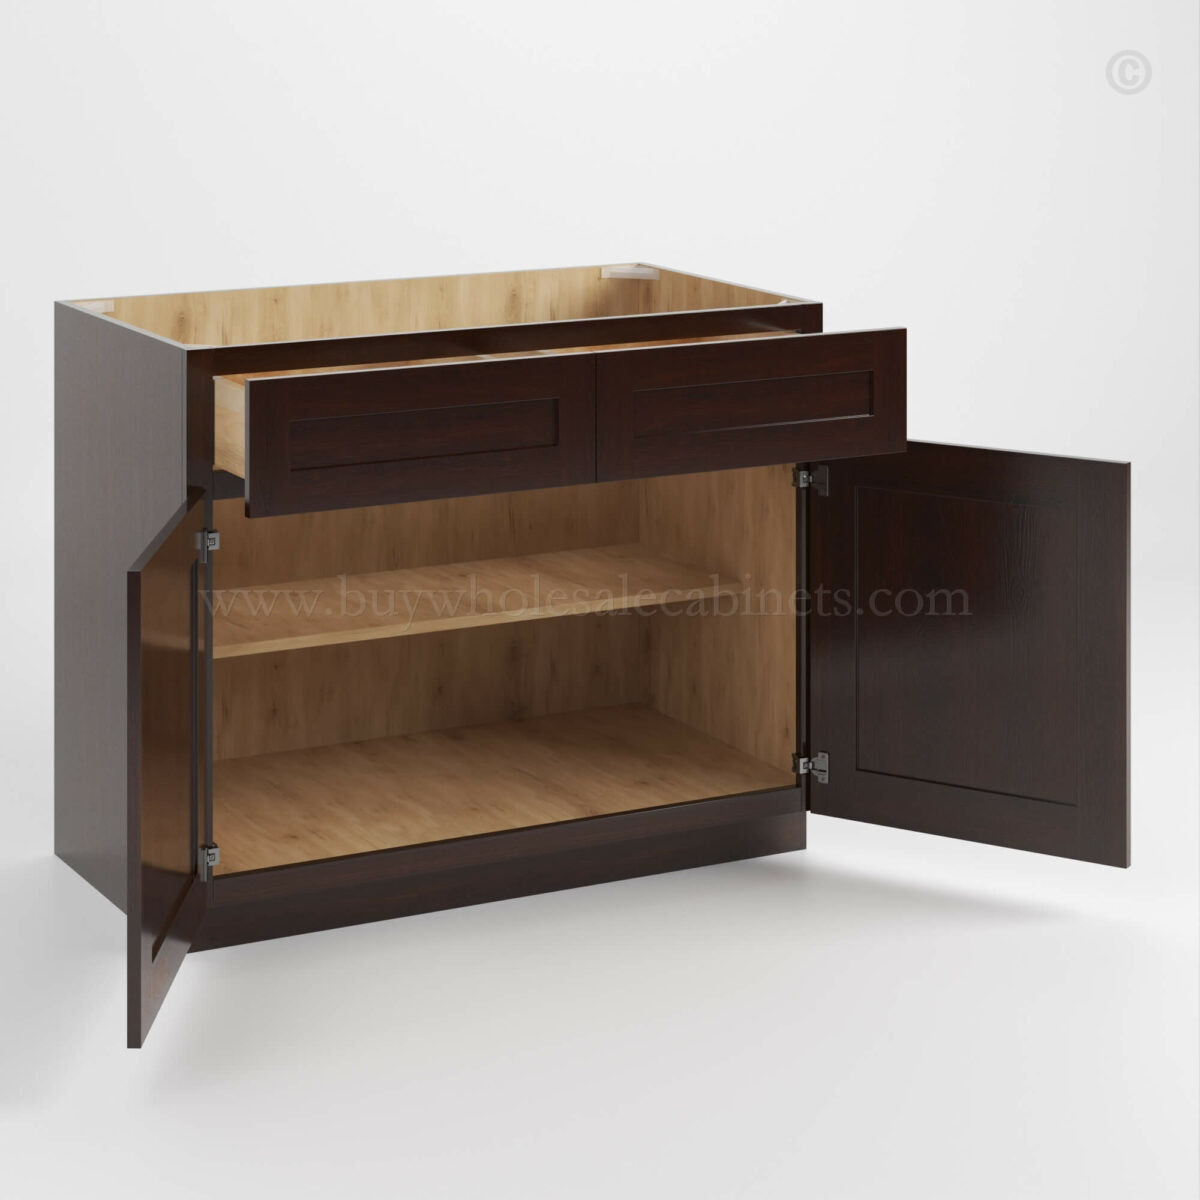 Shaker Espresso Base Cabinet with Double Doors and Drawers image 1